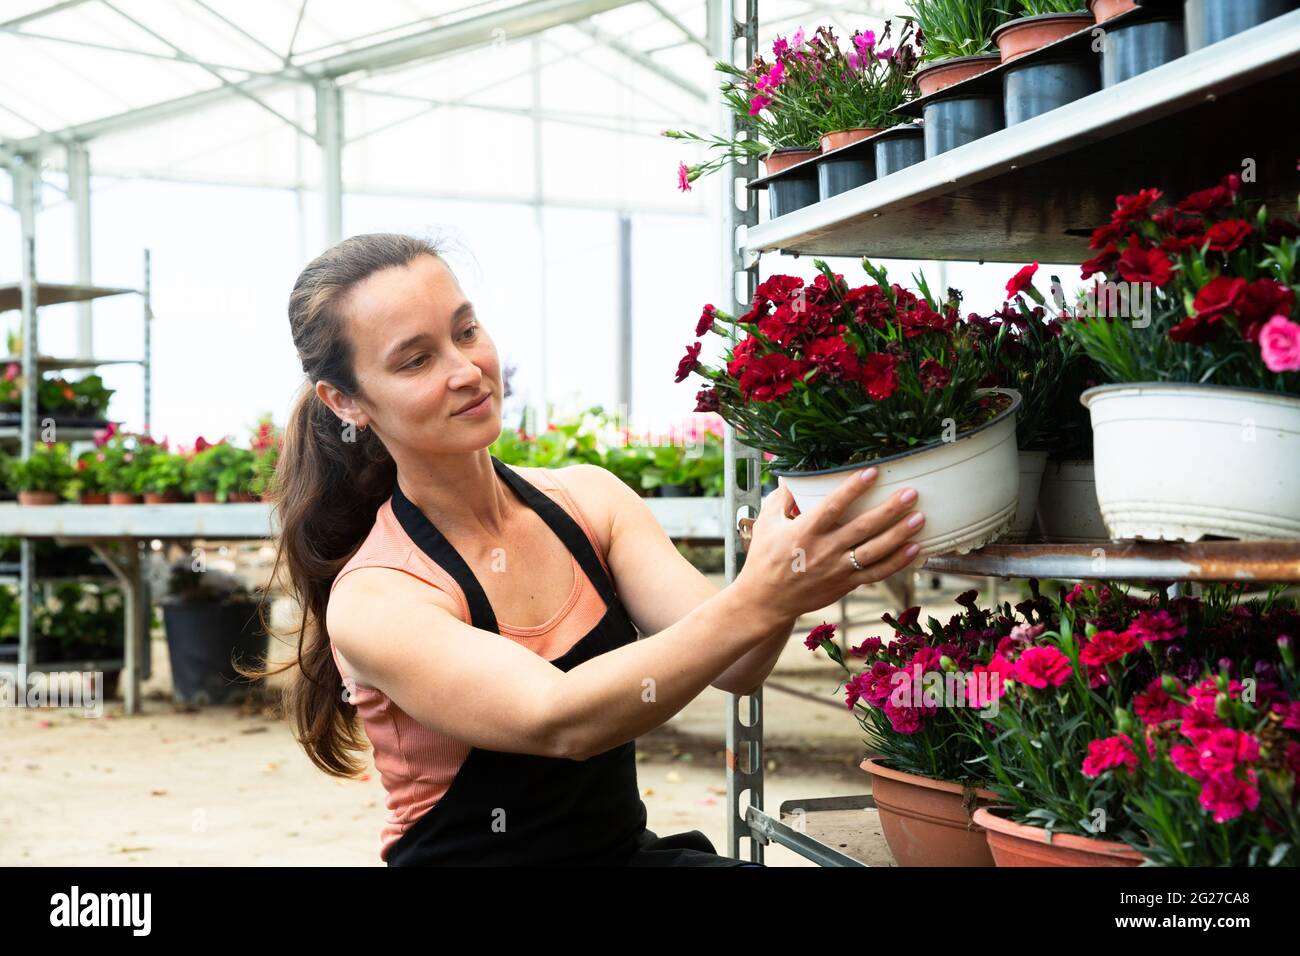 Woman glasshouse store worker holding garden flowers Stock Photo